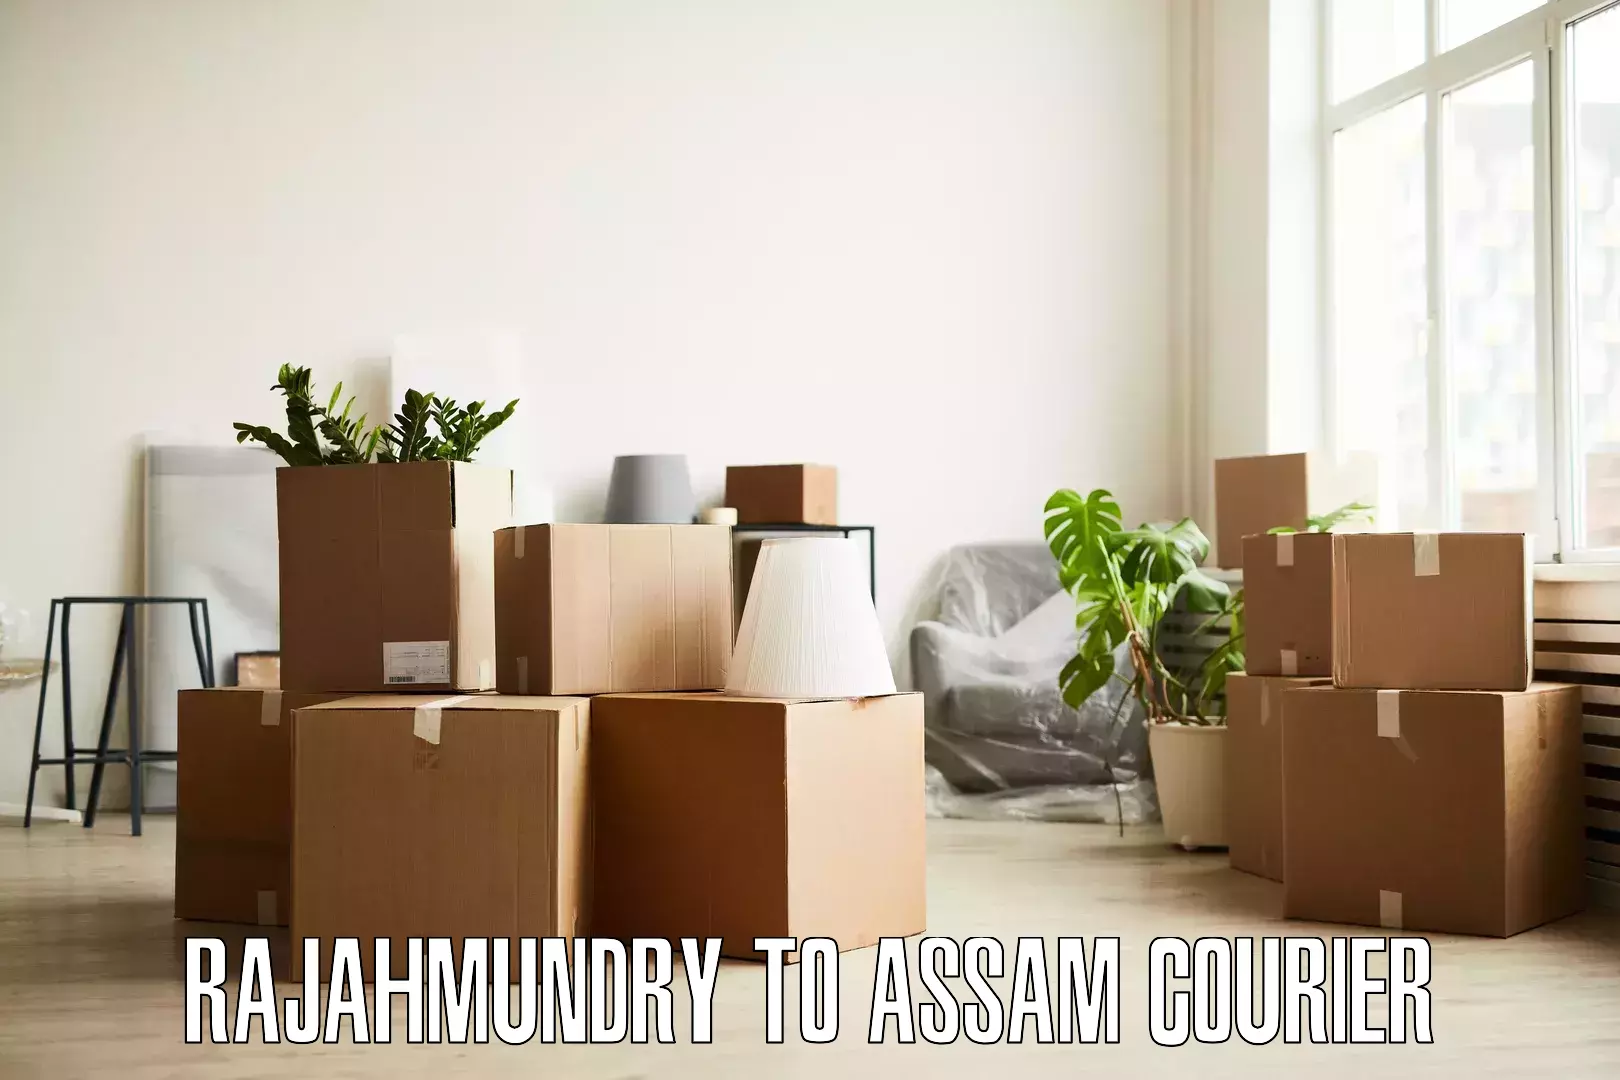 Trusted relocation experts Rajahmundry to Assam